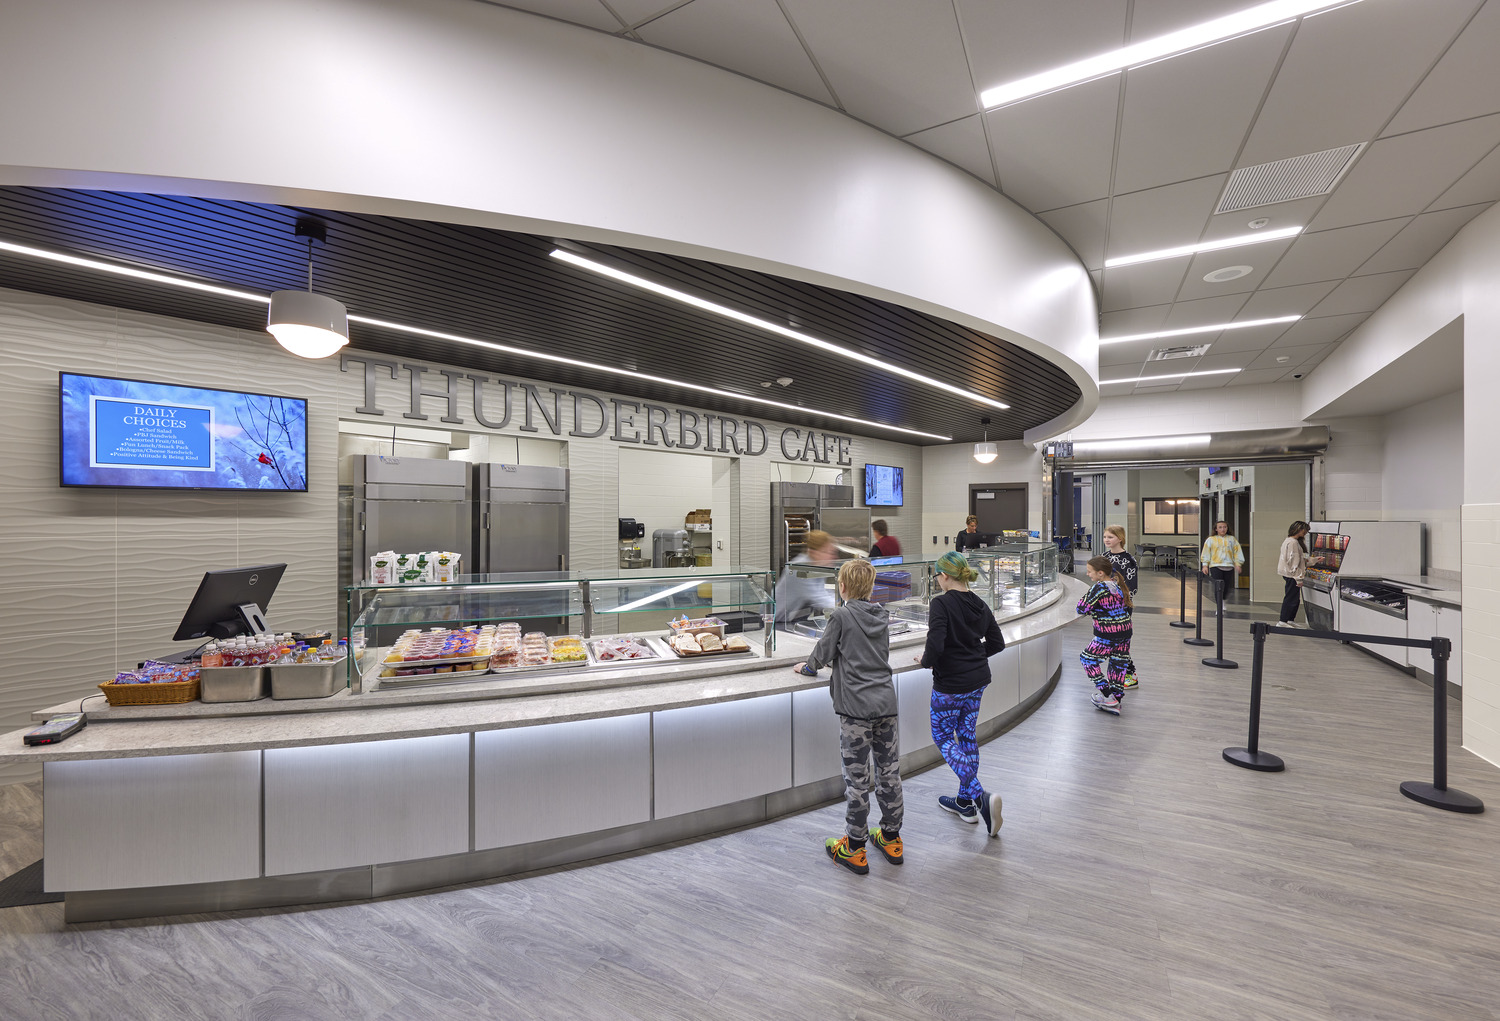 Image shows a cafeteria with a cafe bar. The wall reads "Thunderbirds Cafe" and shows people serving food to students standing in front of the serving station. This is at Chautauqua Lake Central School.